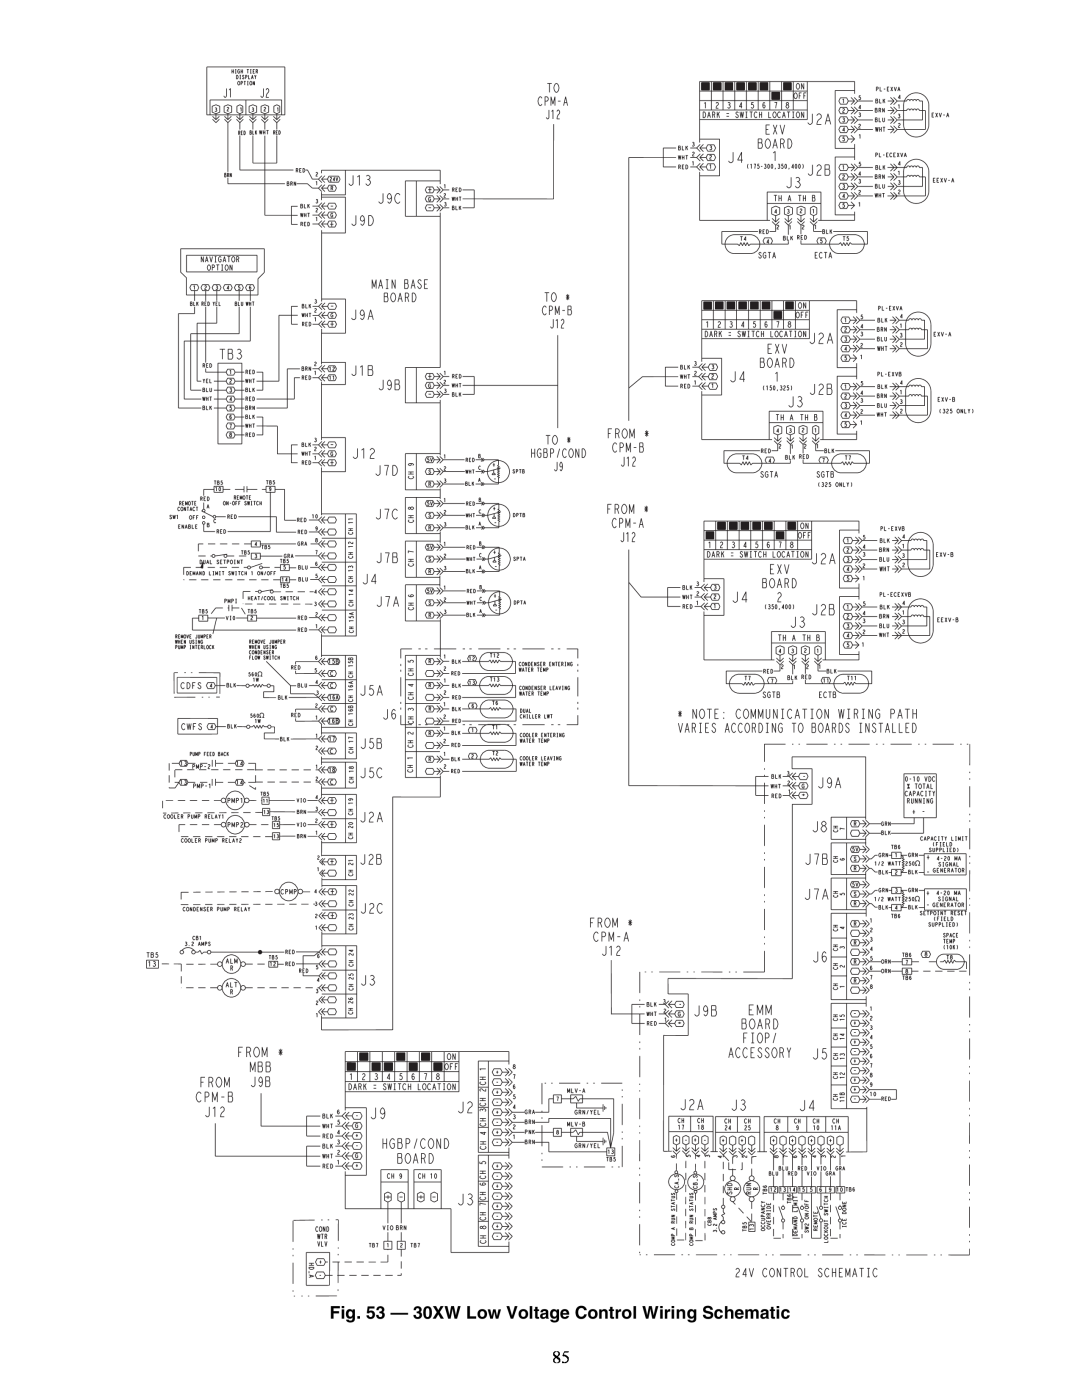 Carrier 30XW150-400 specifications 30XW Low Voltage Control Wiring Schematic, A30-4848 